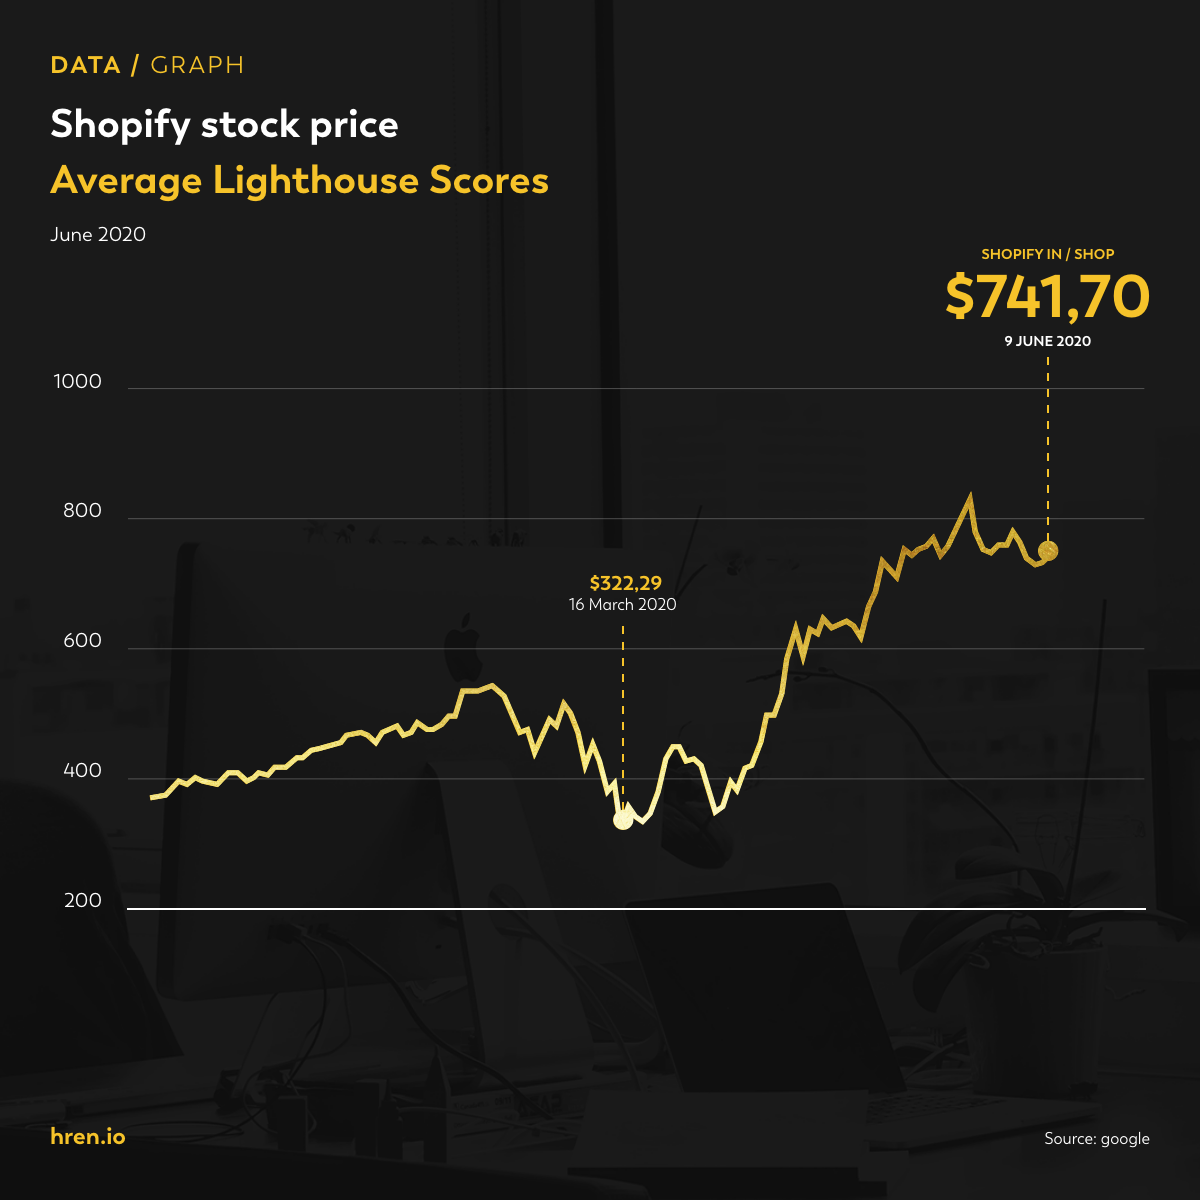 Shopify stock prices before and the increase